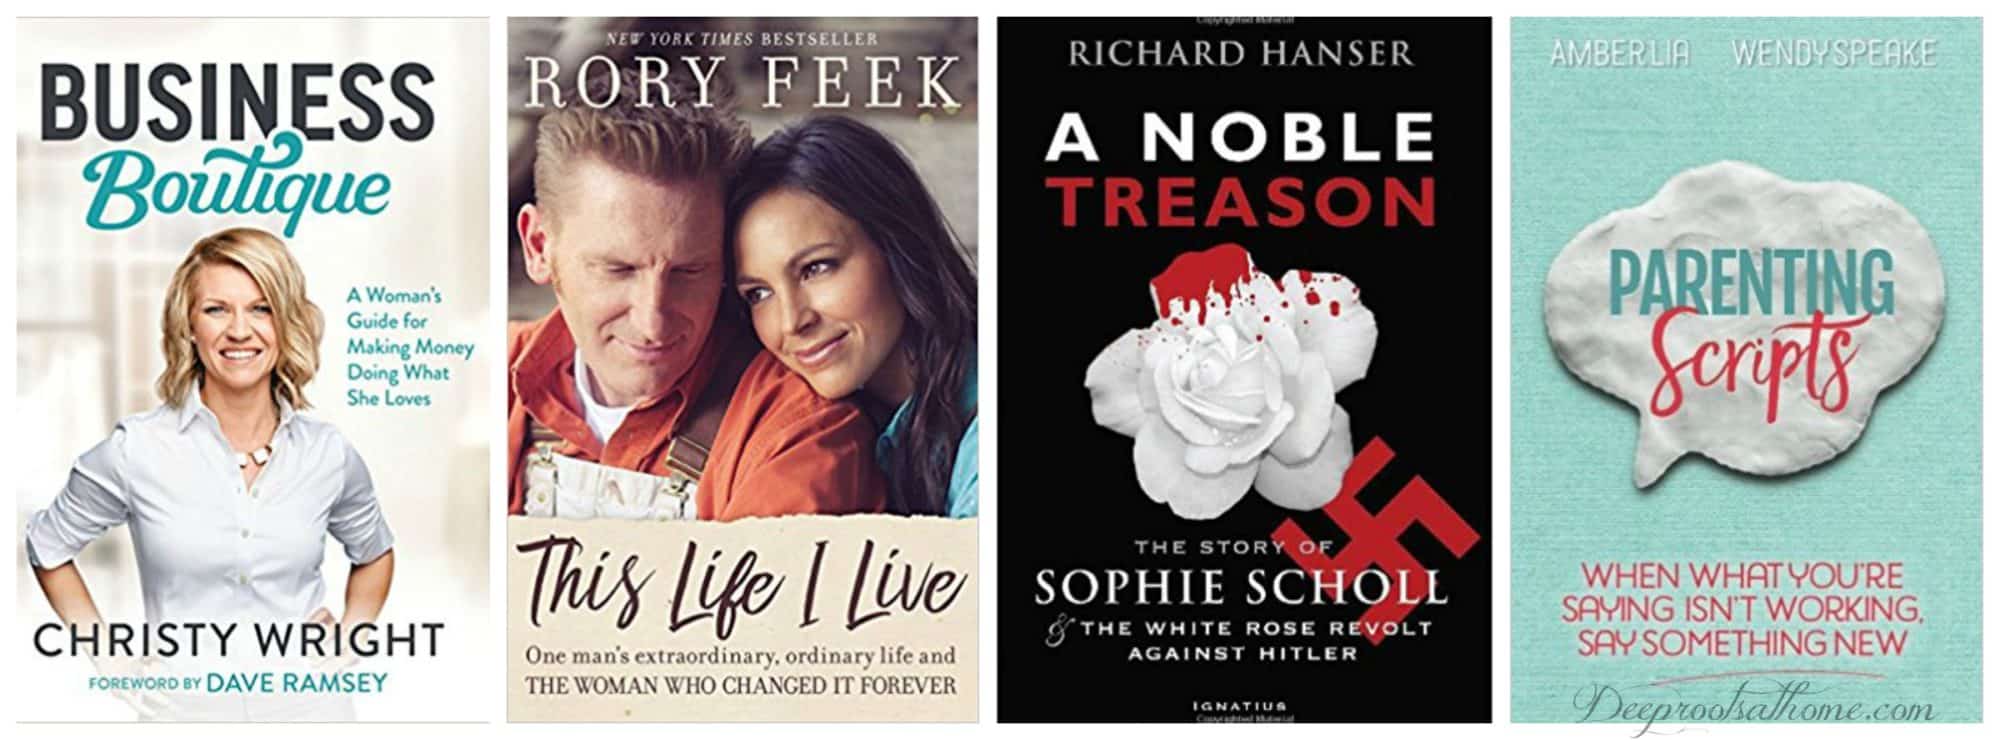 4 book covers: A Noble Treason by Sophie Scholl, White Rose Revolt Against Hitler; This Life I Live by Rory Feek; Parenting Scripts by Amber Lia and Business Boutique by Christy Wright.